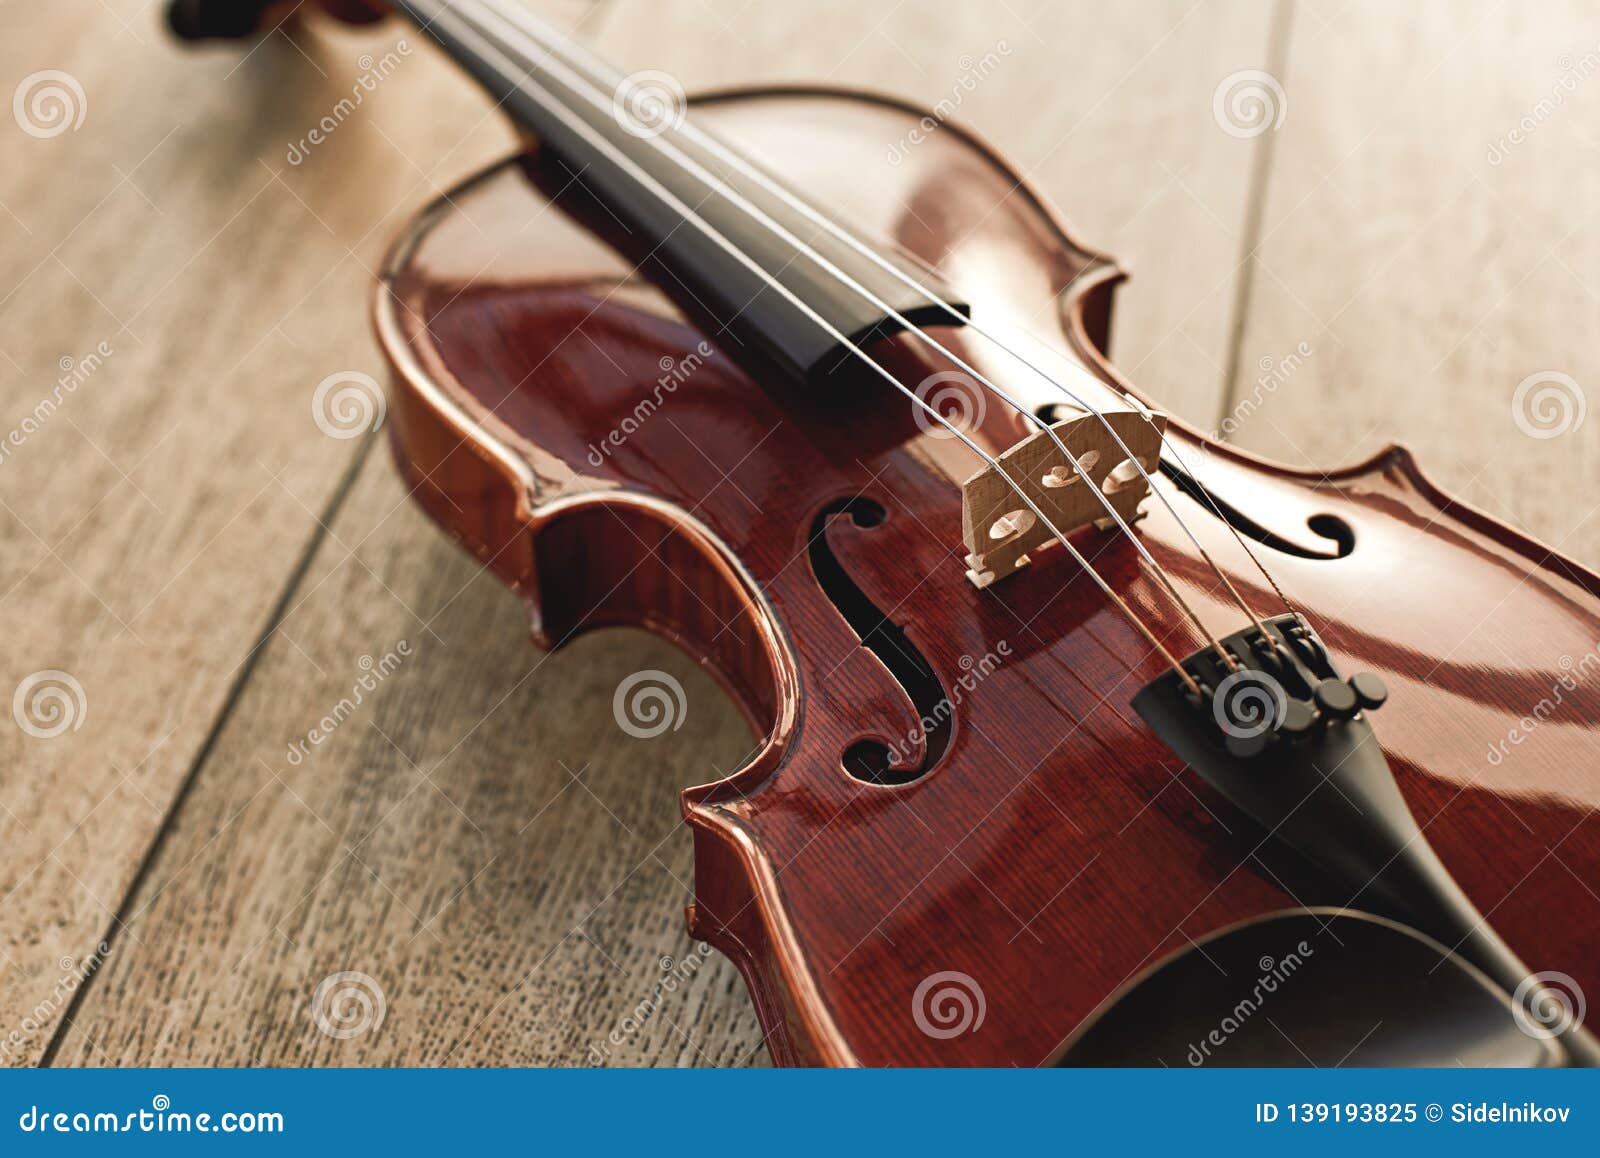 Close Up View of Beautiful Classical Violin Lying on Wooden Background. Music  Background Stock Image - Image of angle, classical: 139193825